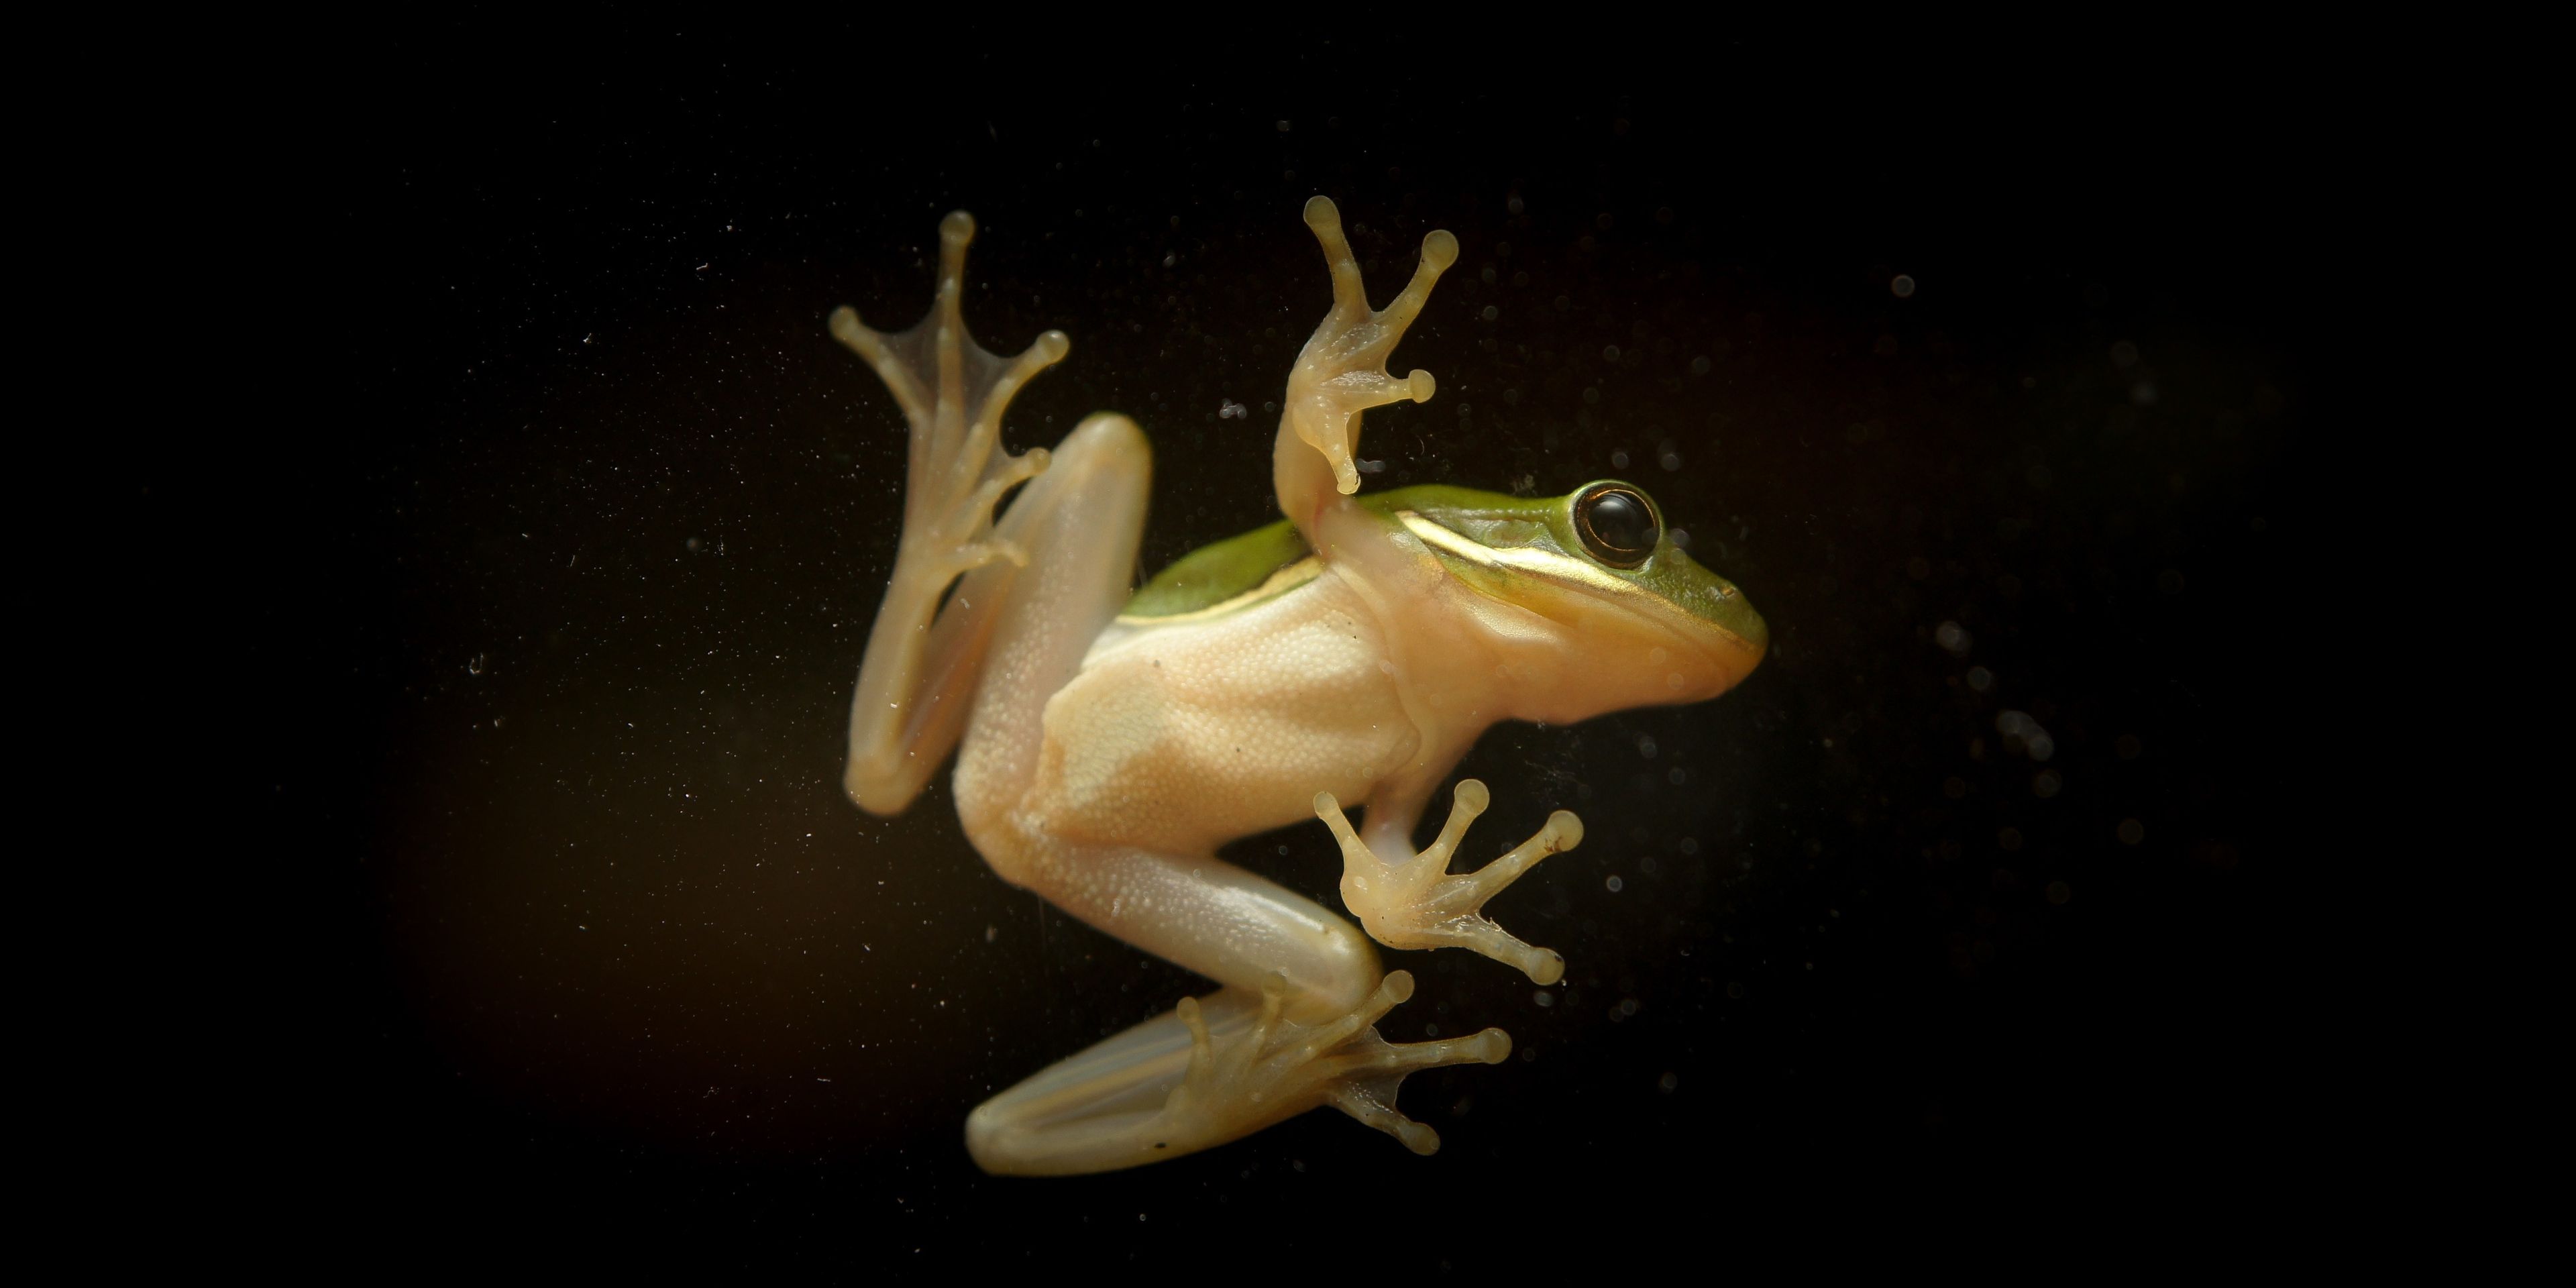 A view of a frog from underneath.